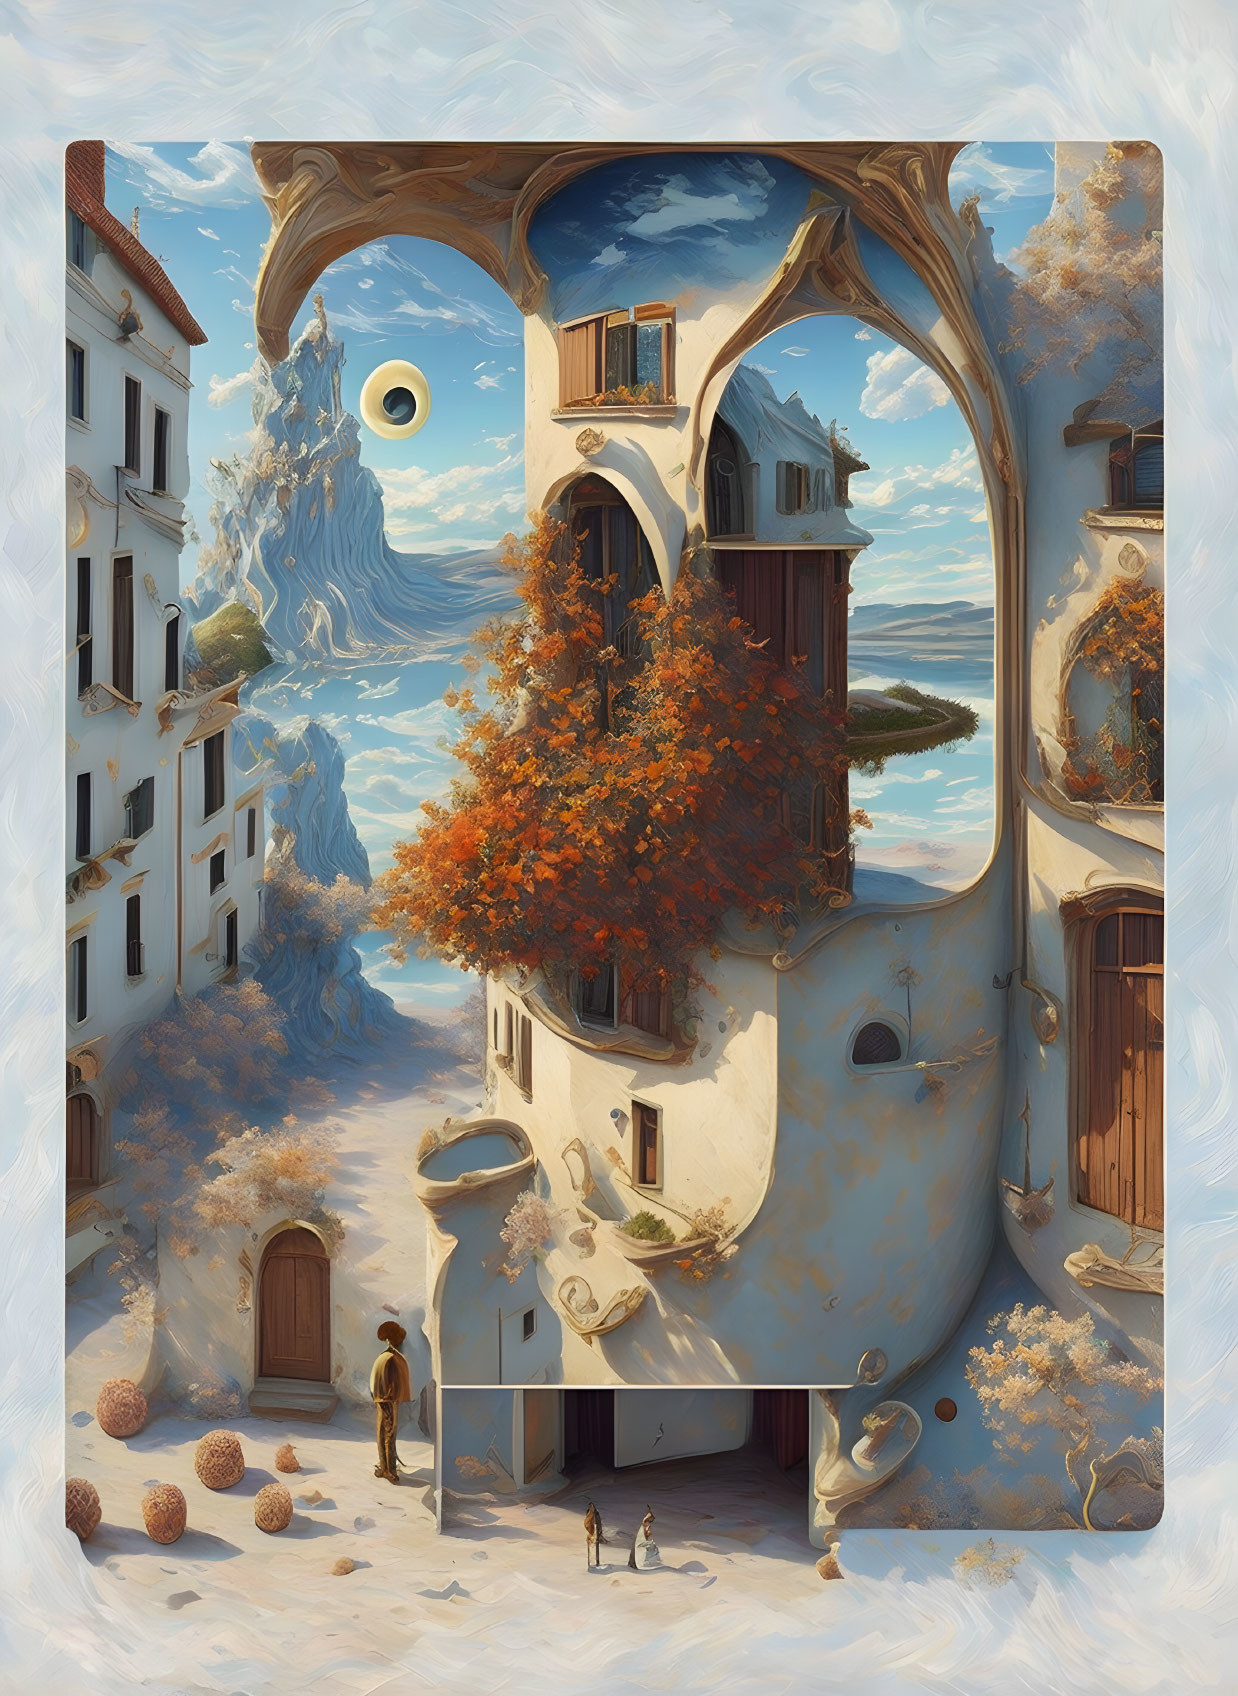 Surreal autumn tree in Escher-like labyrinth with whimsical buildings, floating islands, and twin